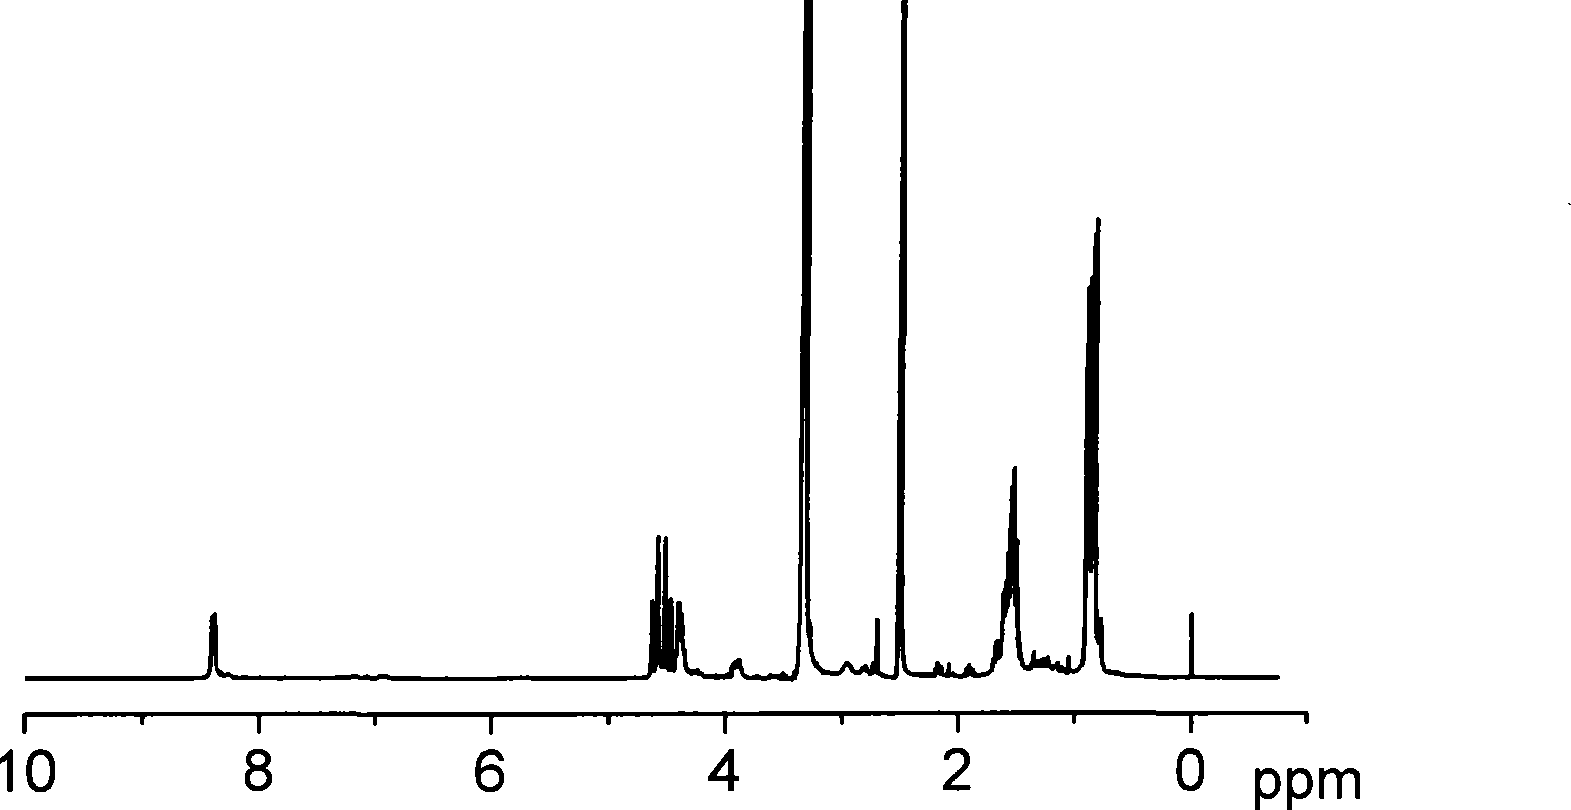 Preparation method of high molecular weight poly-morpholine-2,5-dione derivative and preparation method of the copolymer thereof